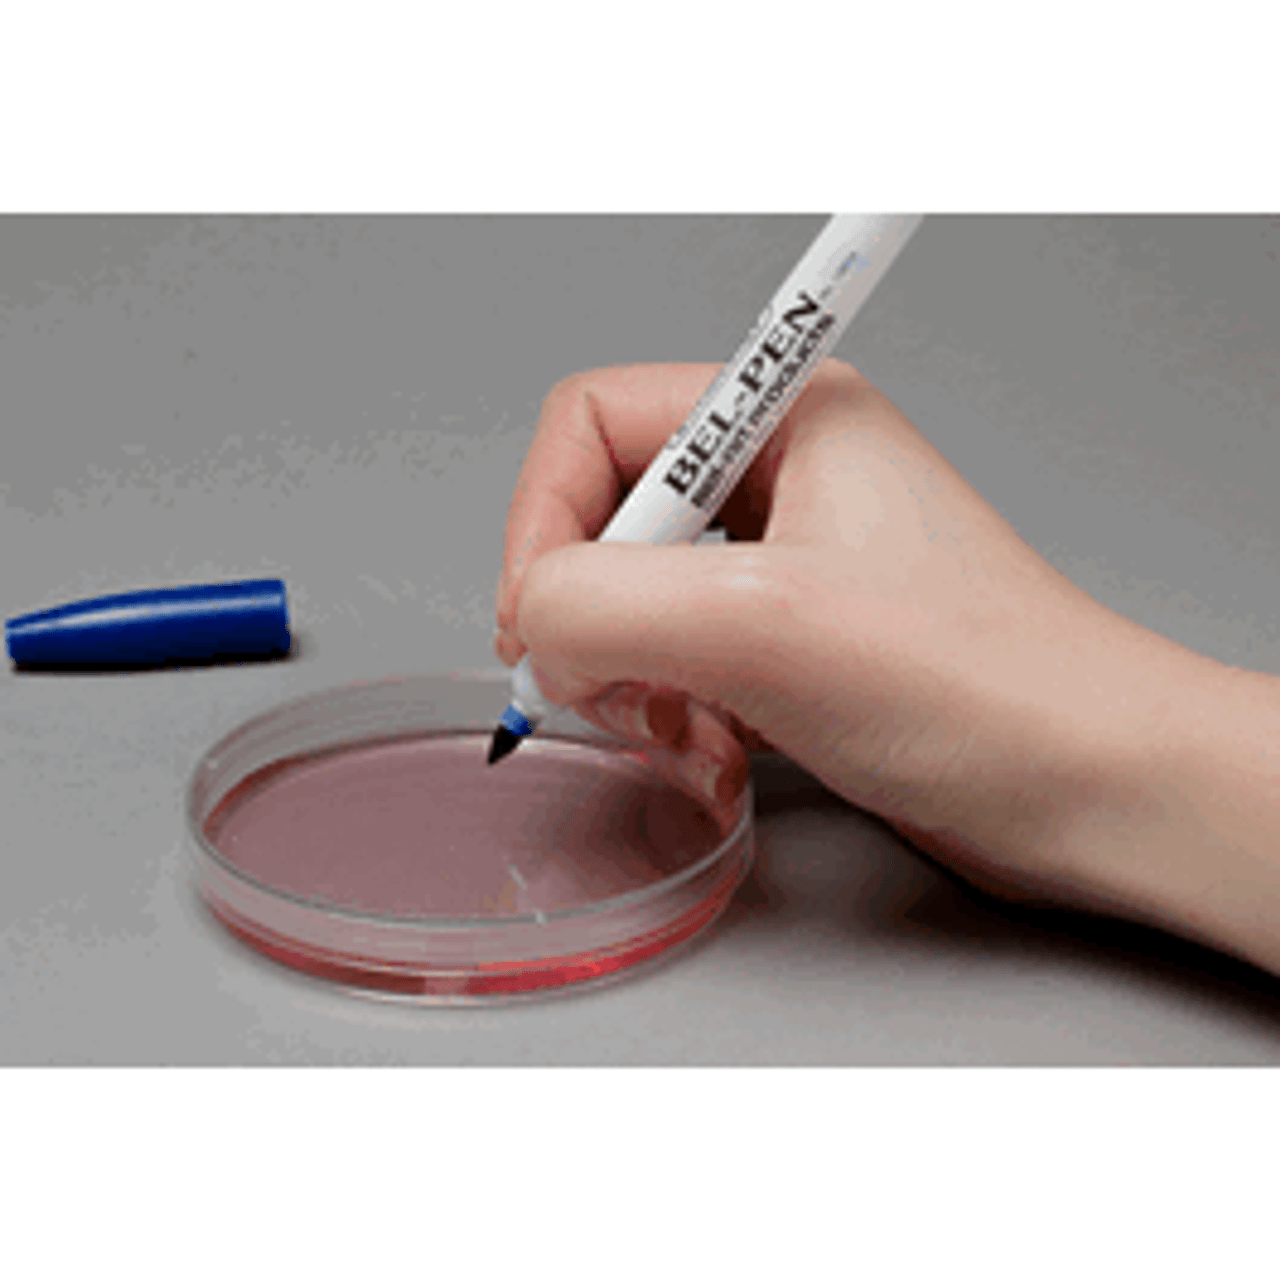 Fine Tip Alcohol-Resistant Water-Resistant Cryogenic Marker